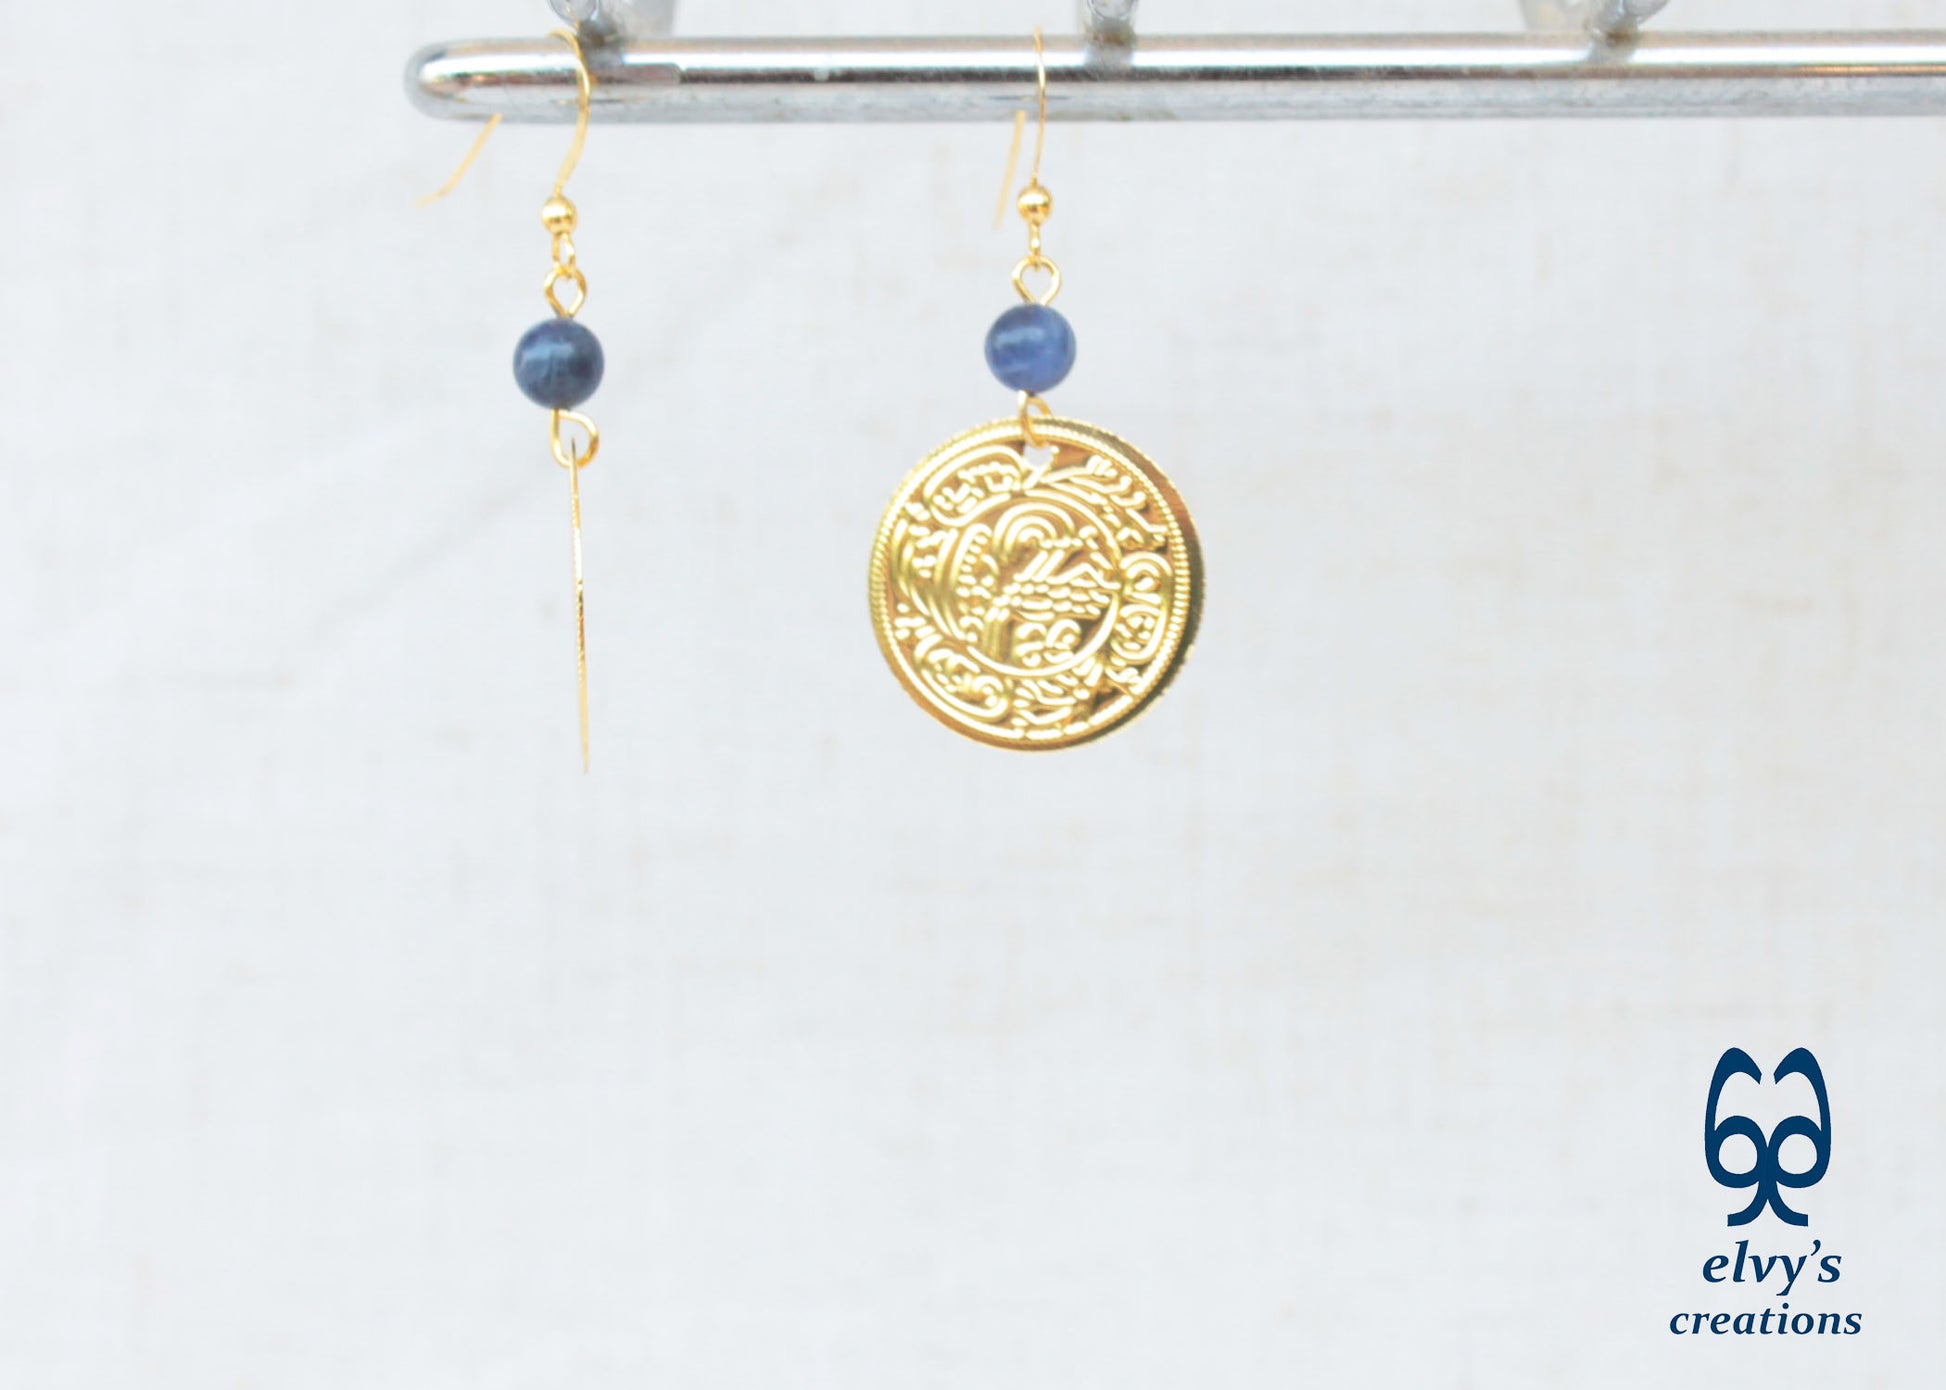 Gold Folklore Earrings Coin Dangle Drop Greek Traditional Jewelry 925 Sterling Silver Gold Plated Gypsy Jewelry Blue Sodalite Gemstone